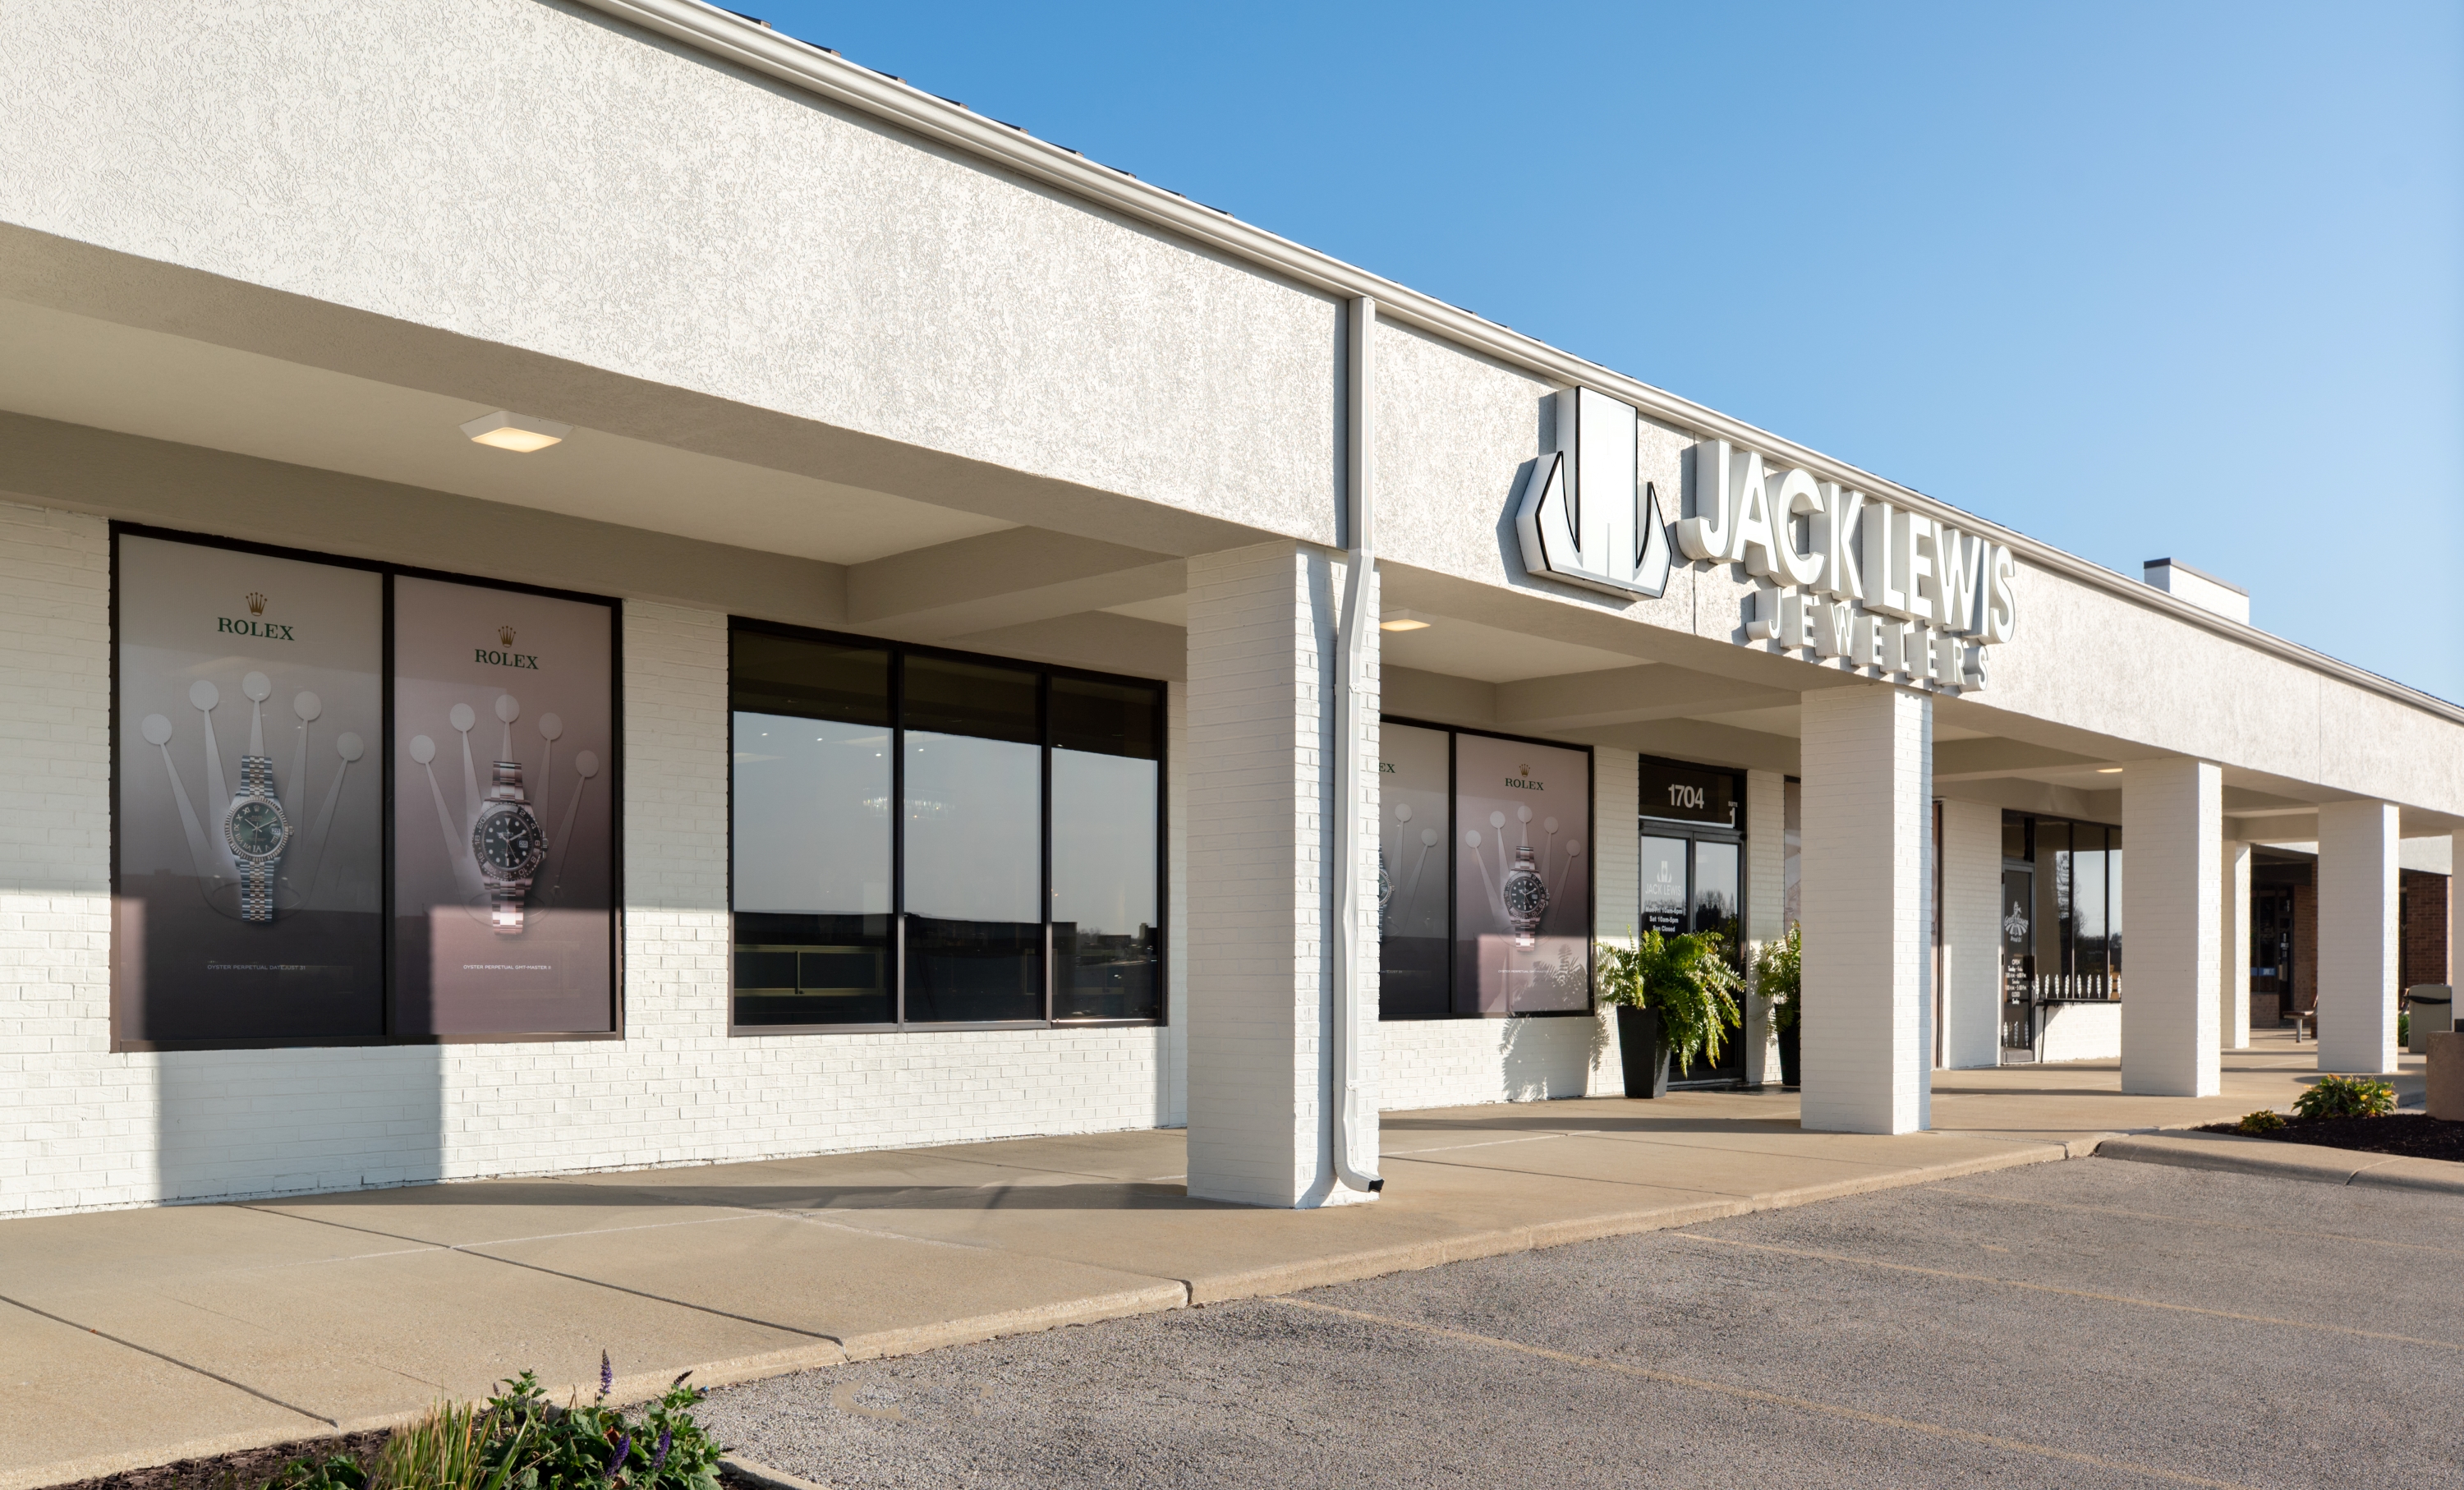 Exterior Building and Parking for Jack Lewis Jewelers in Bloomington, Illinois